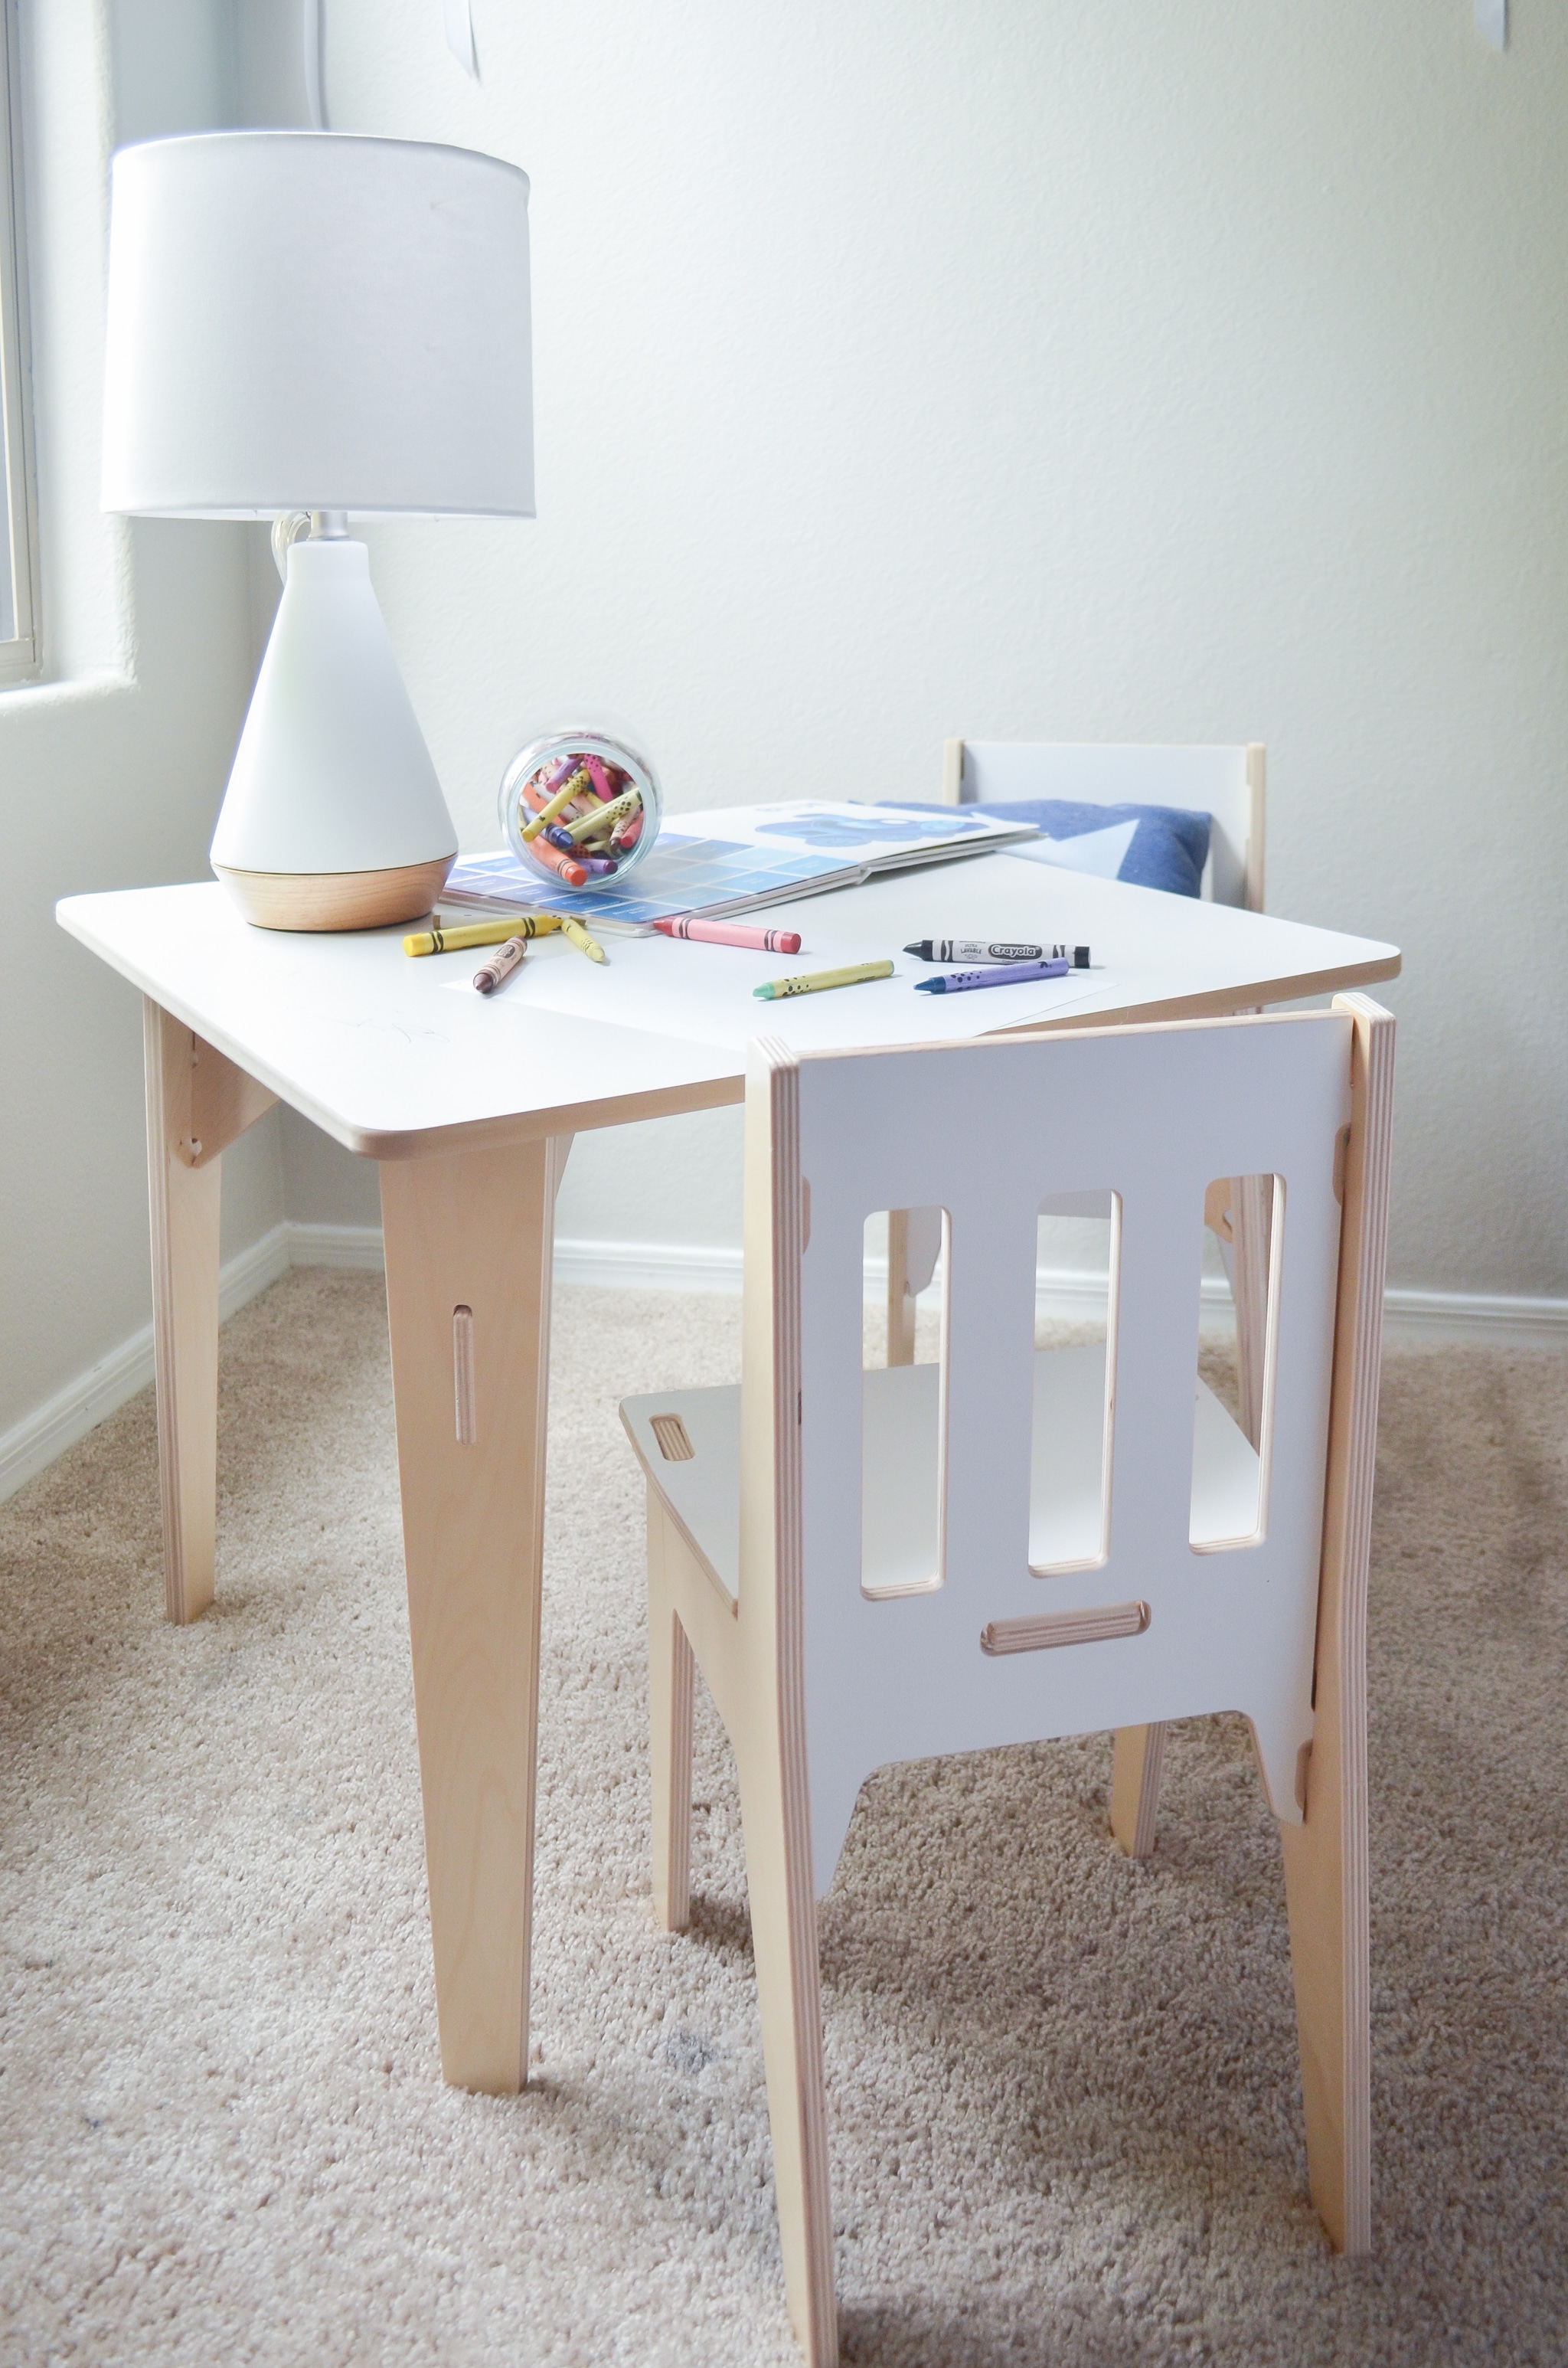 Modern Play Table in Boy's Toddler Room - Project Nursery